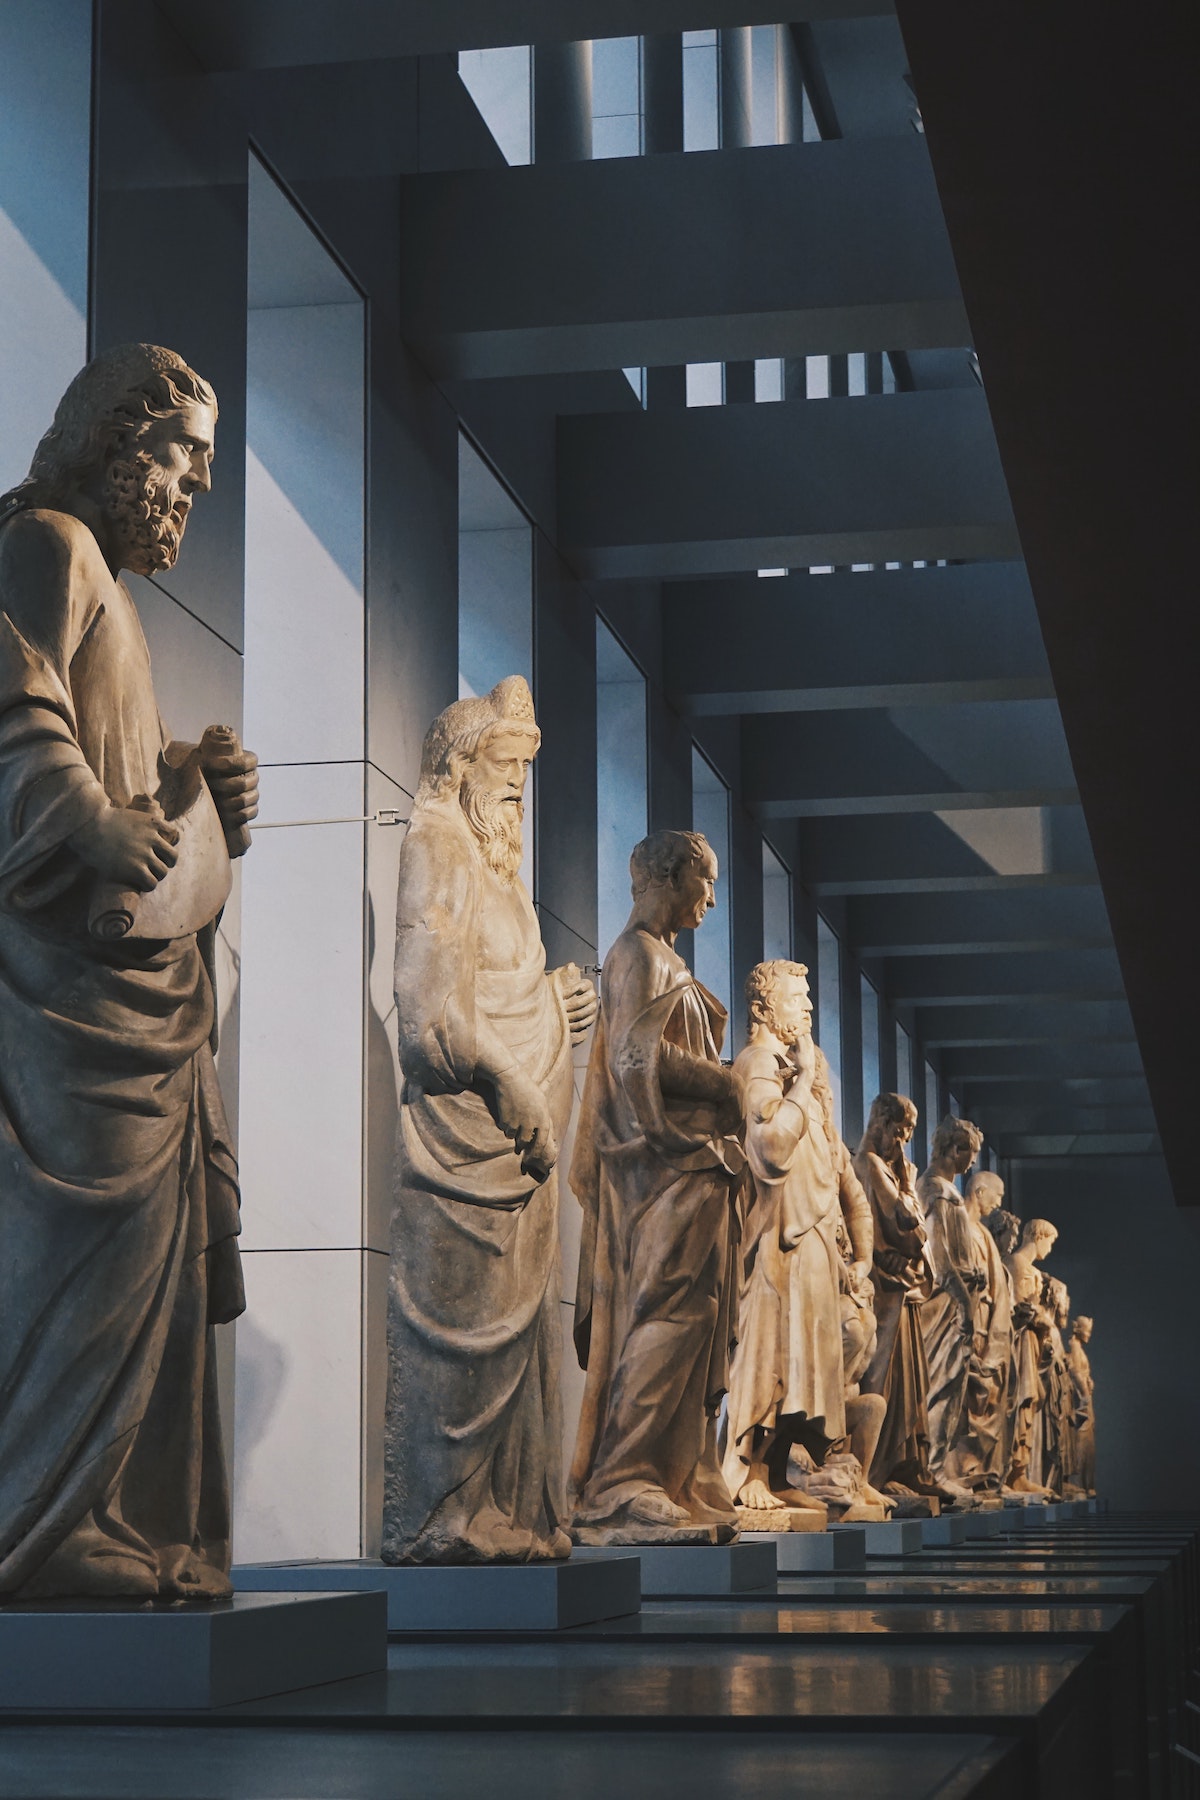 White stone statues of men inside a museum